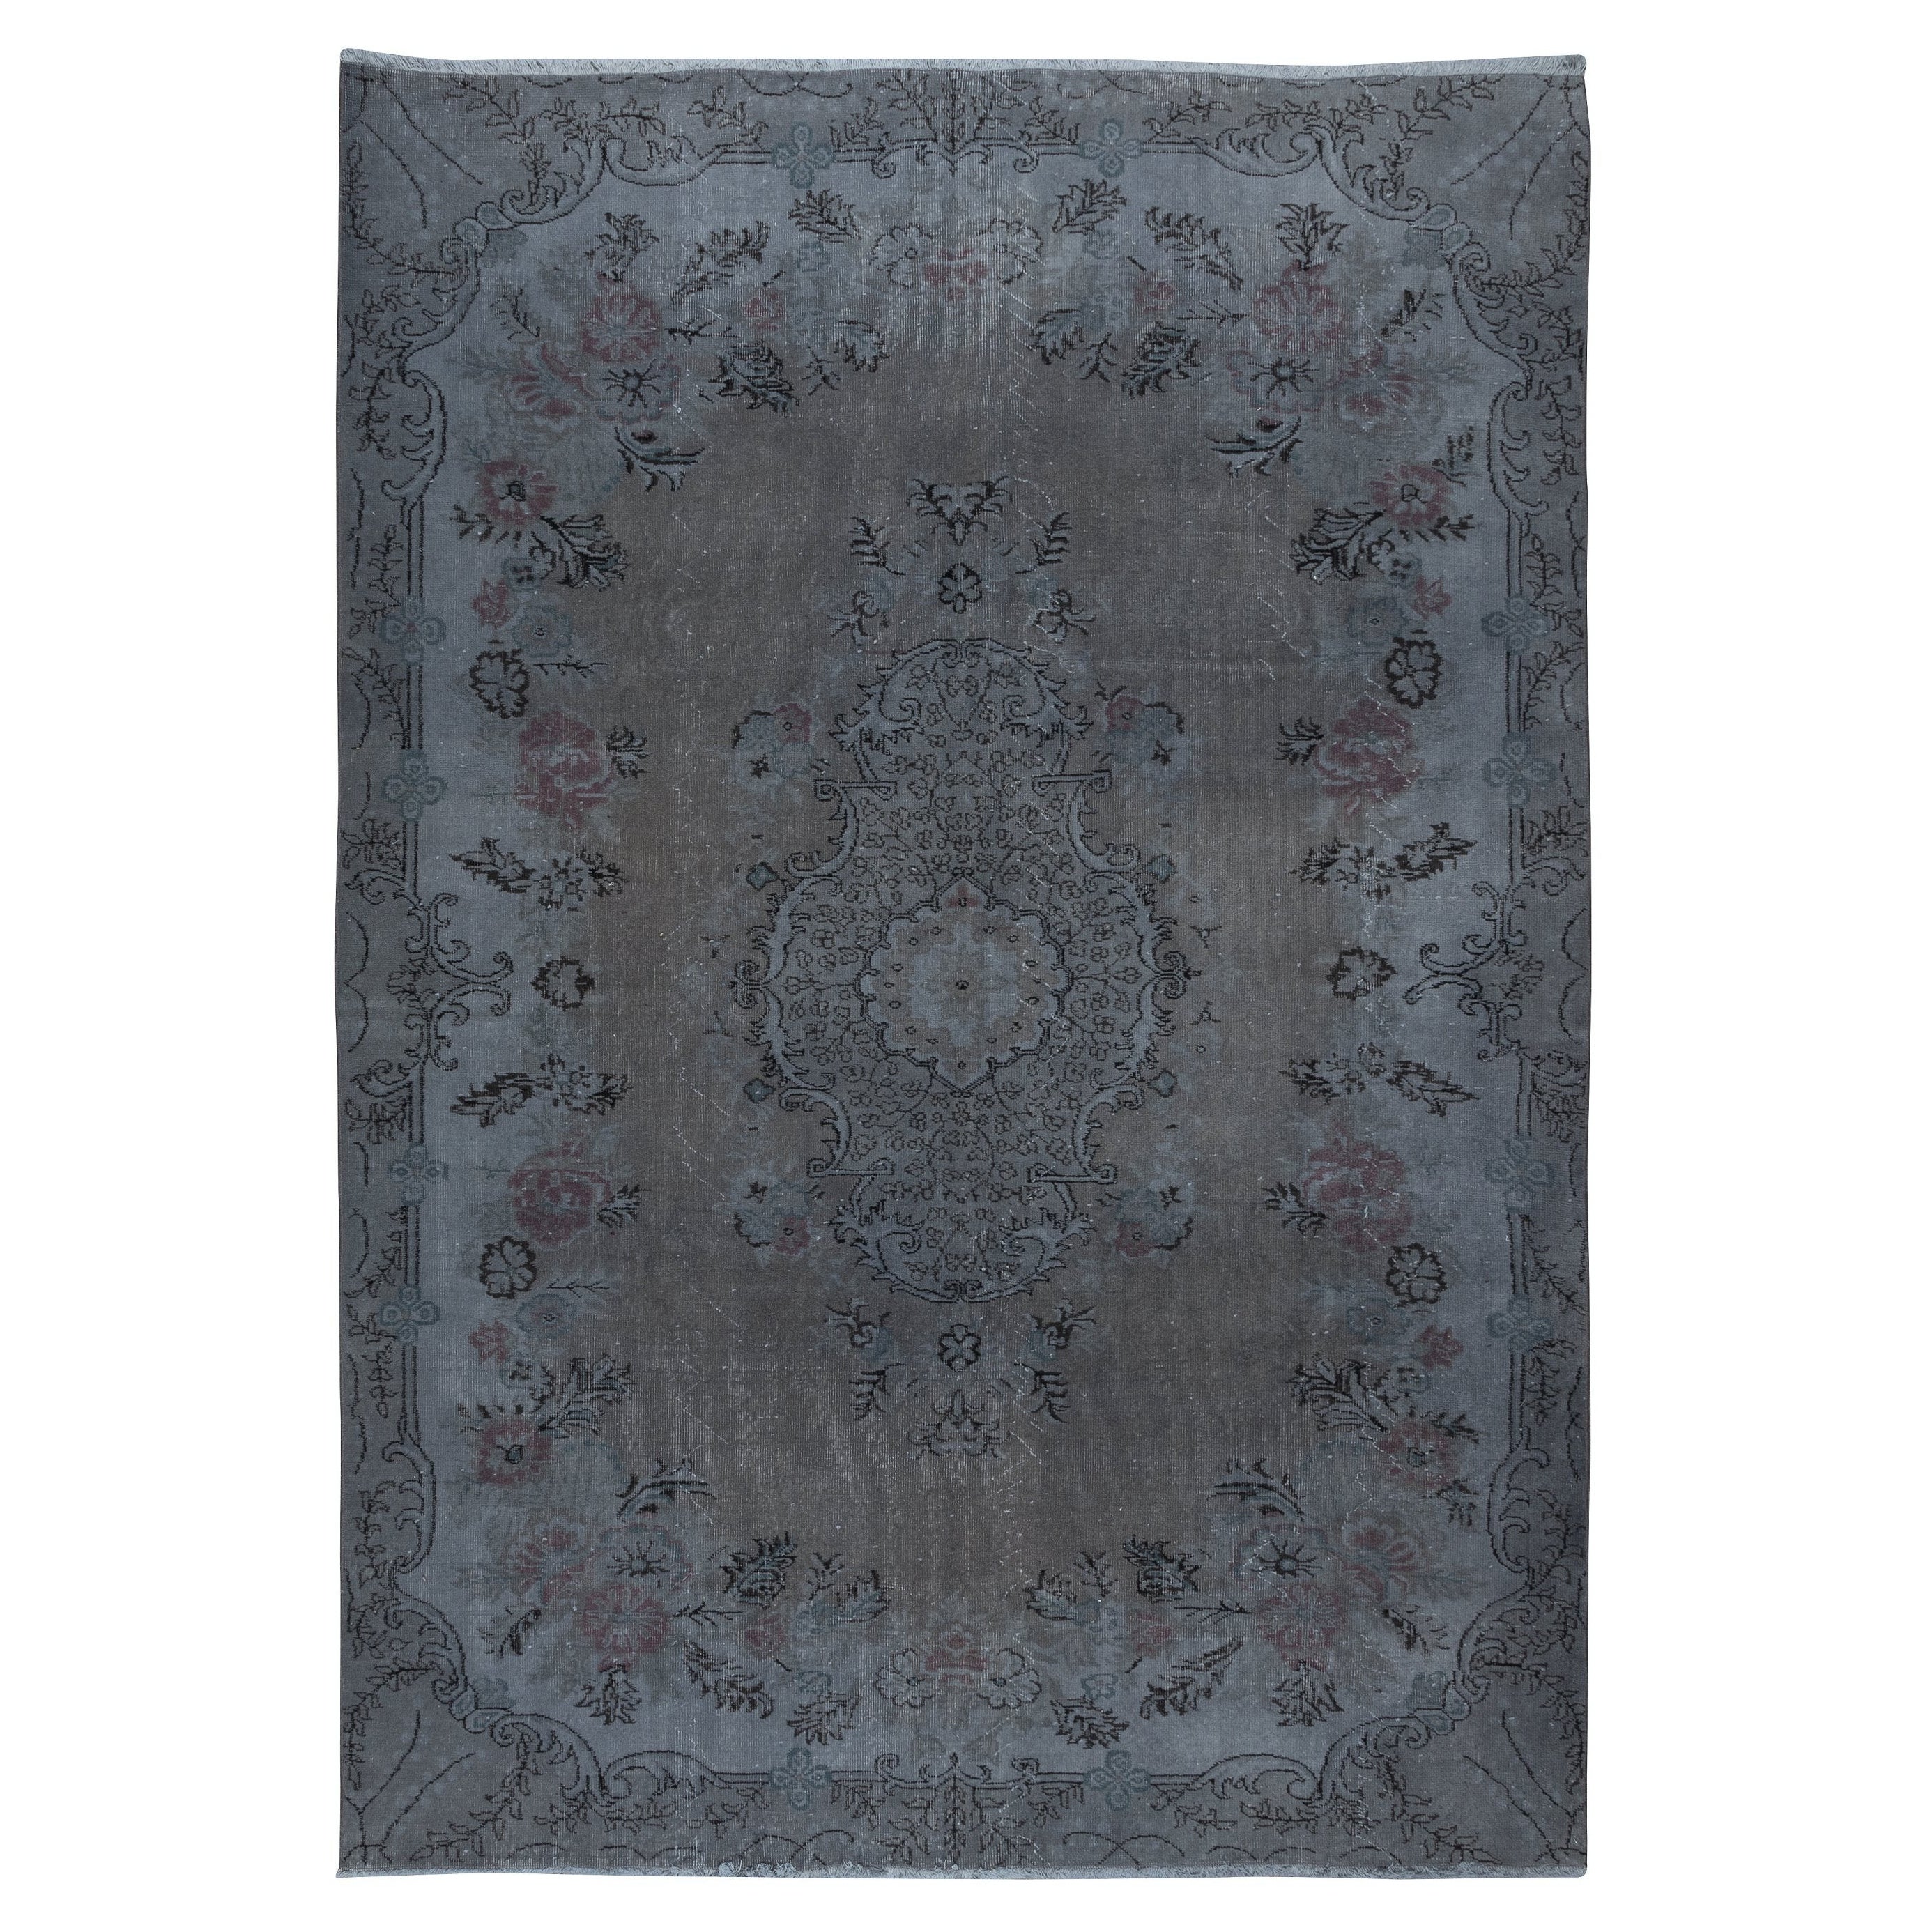 7x10 Ft Decorative Handmade Turkish European Design Rug in Gray and Brown Tones For Sale